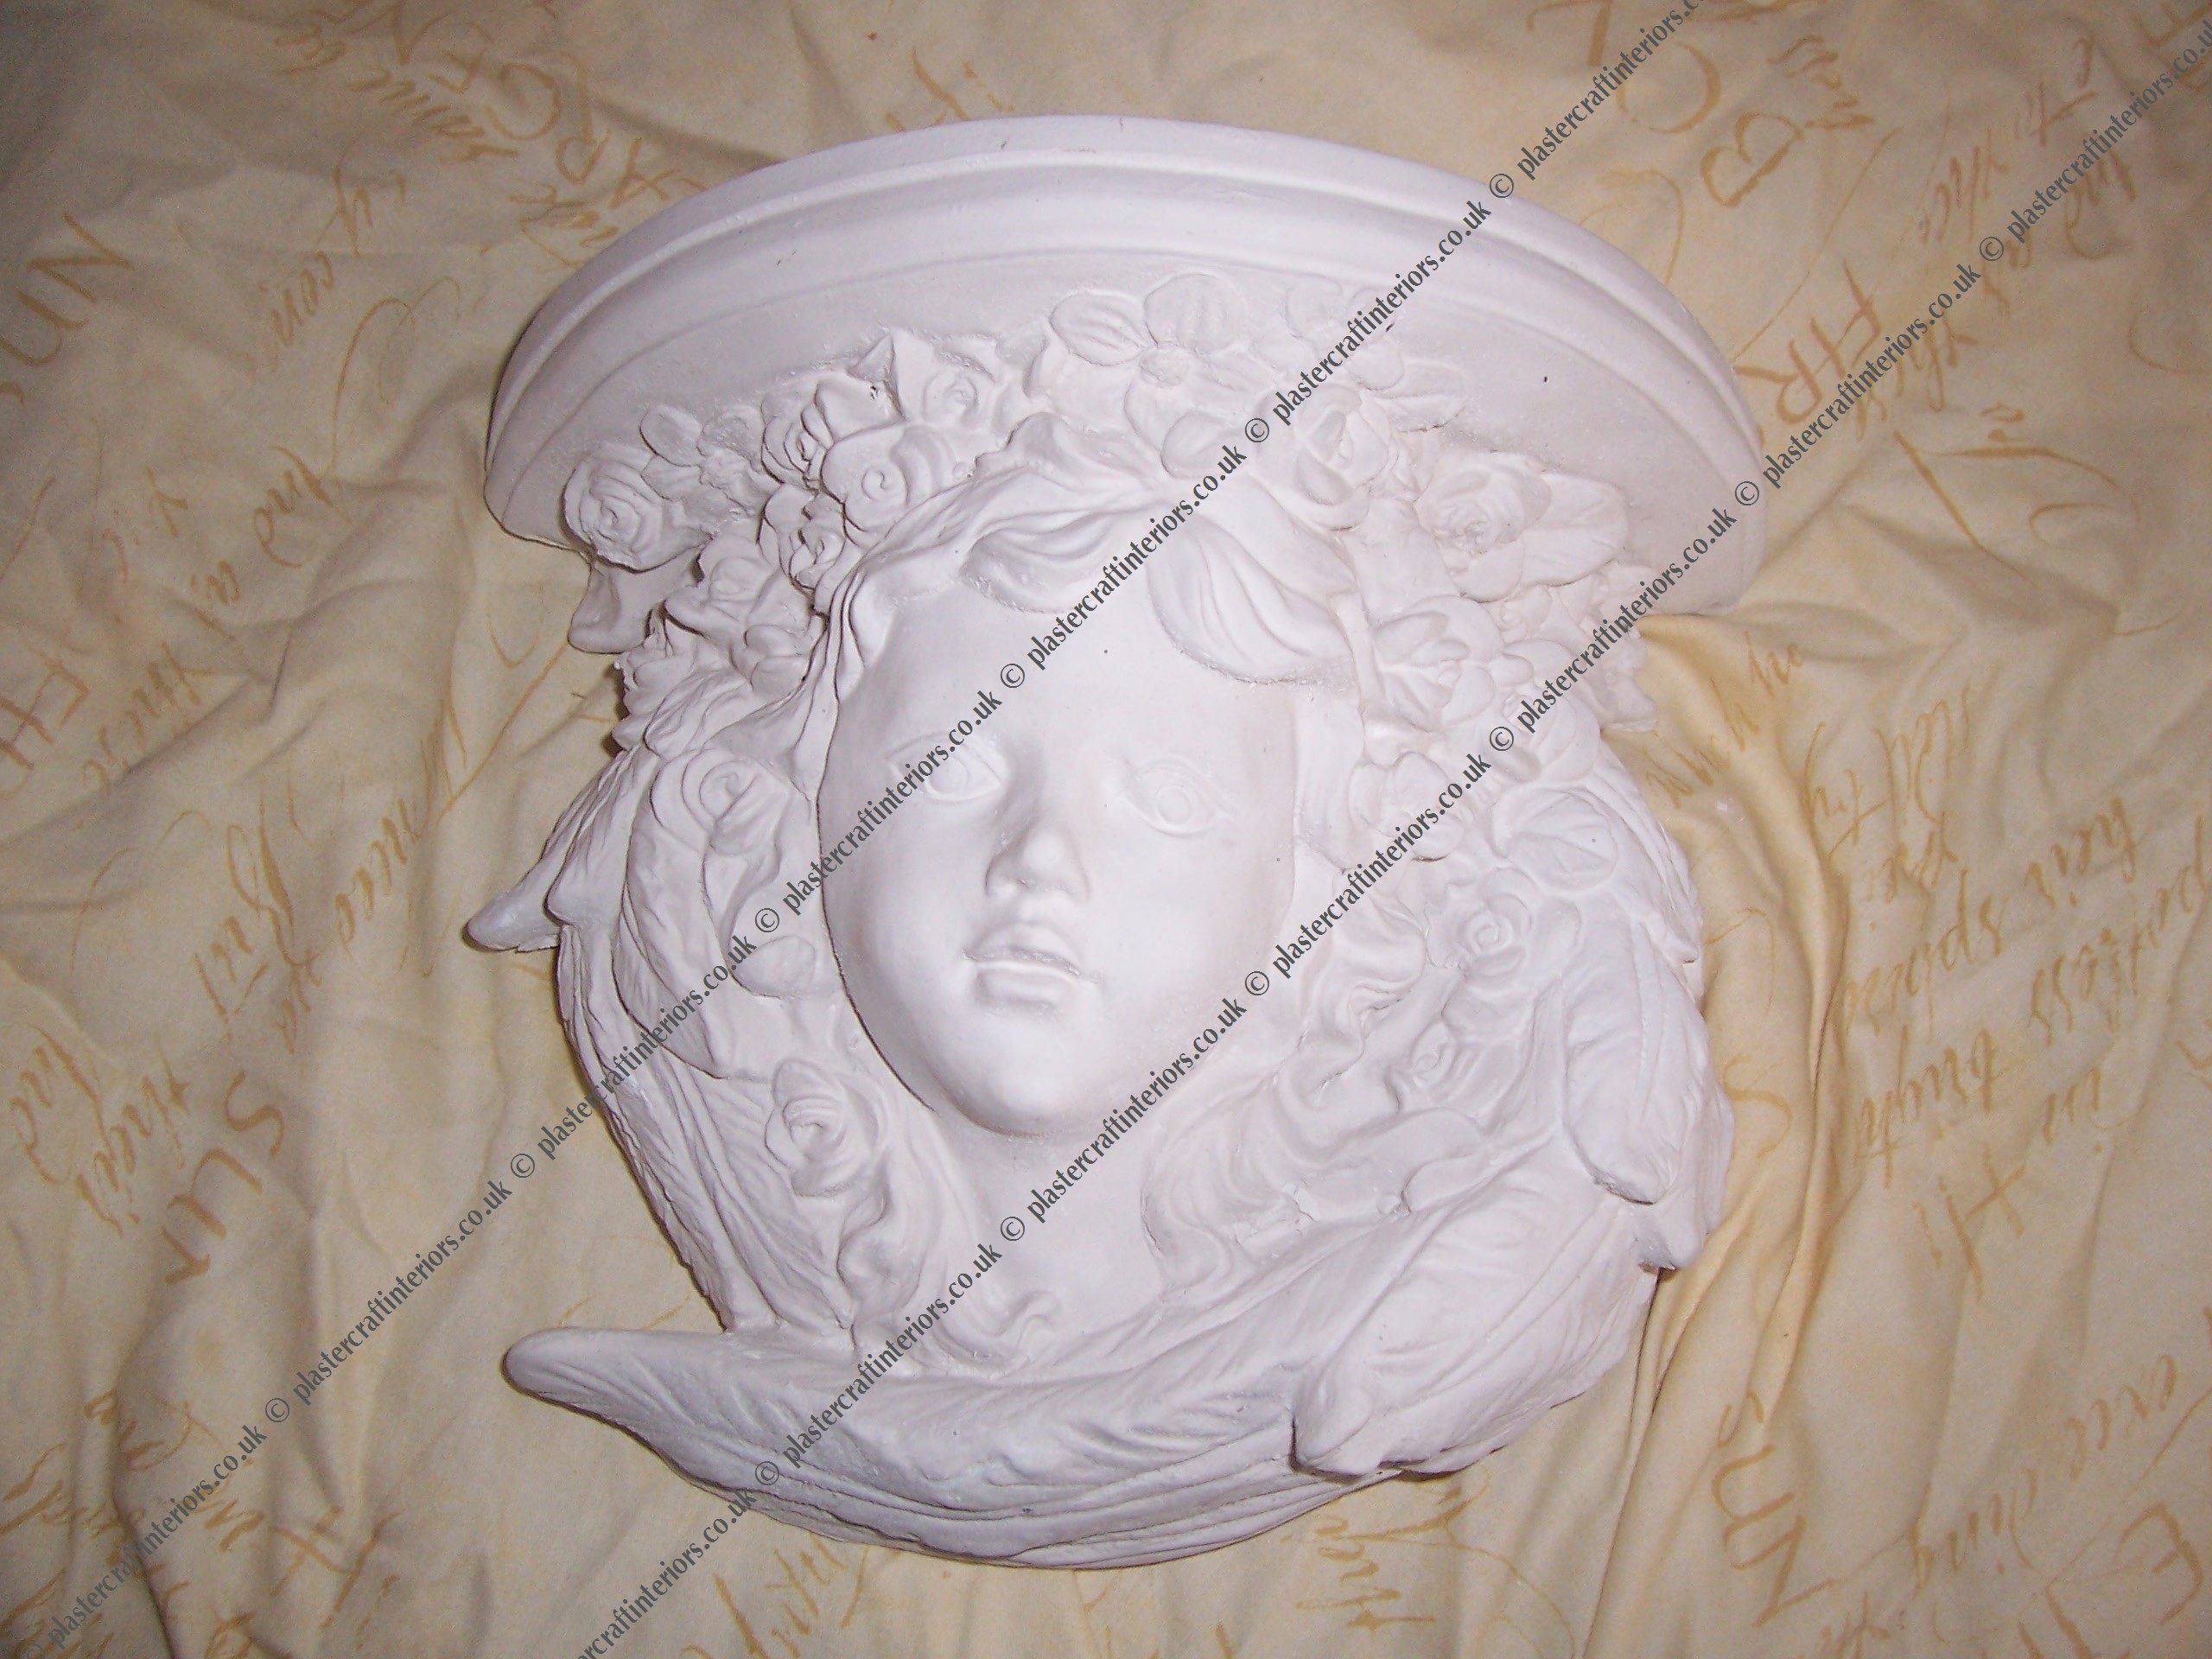 1 Architectural Ornate Plaster Corbel Bracket Shelf Wall Decor Plaque Swagg Tail